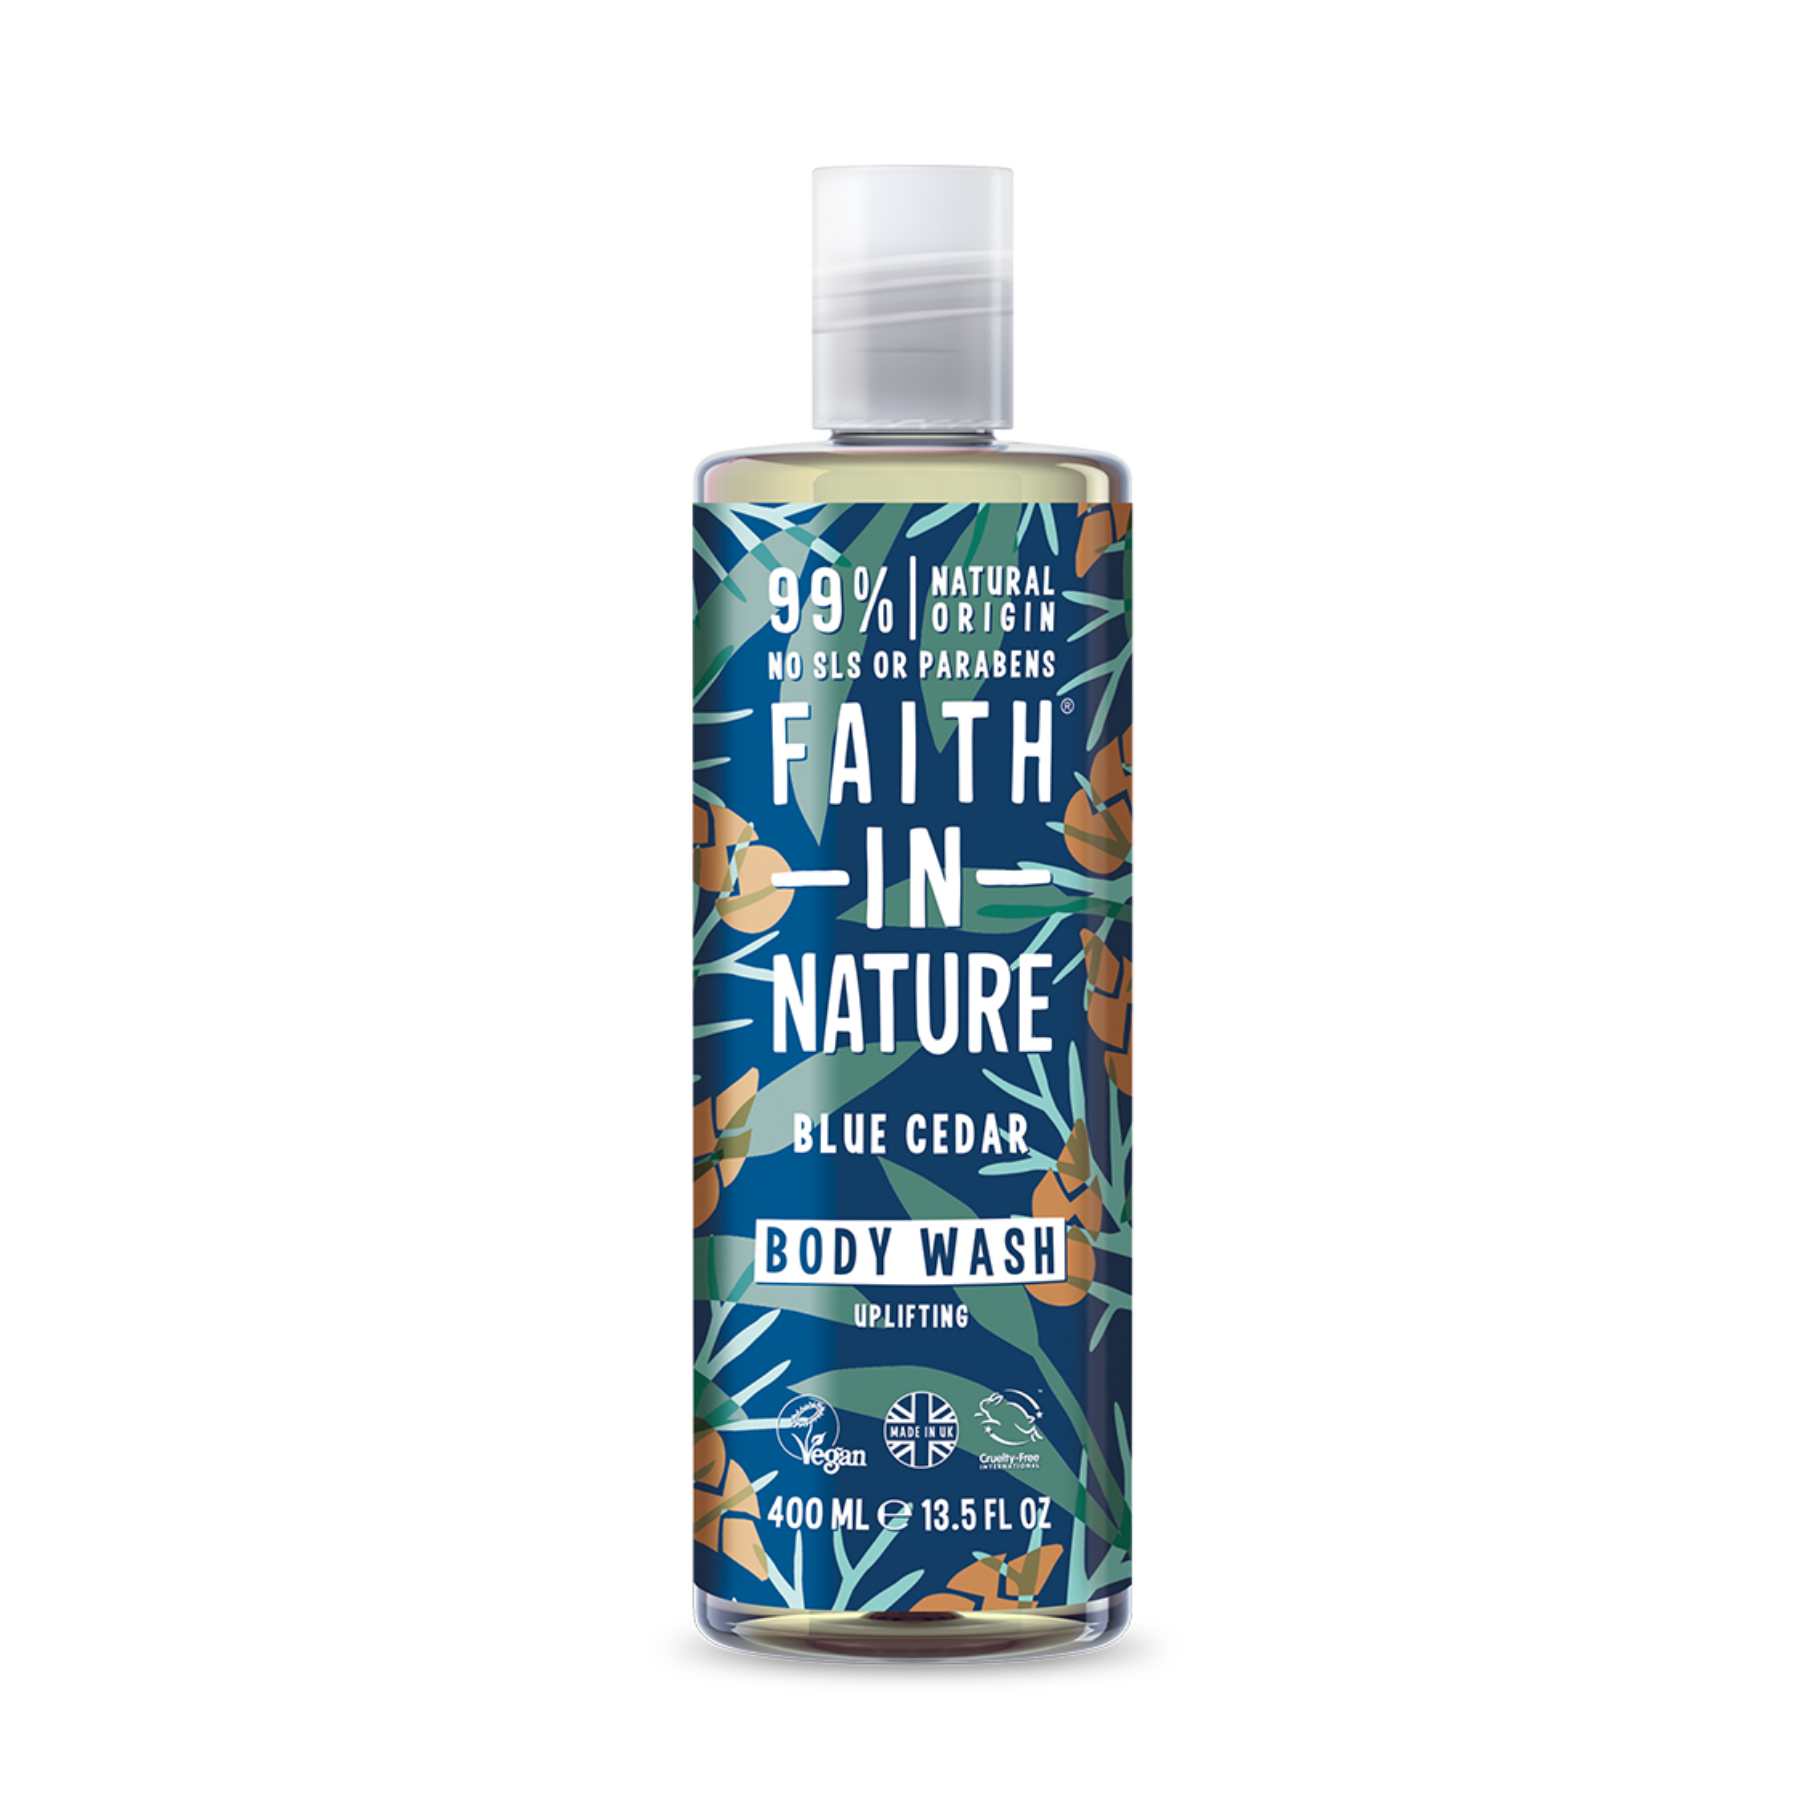 Shop Blue Cedar Body Wash from Faith in Nature on SublimeLife.in. Best for providing clean and smooth skin.